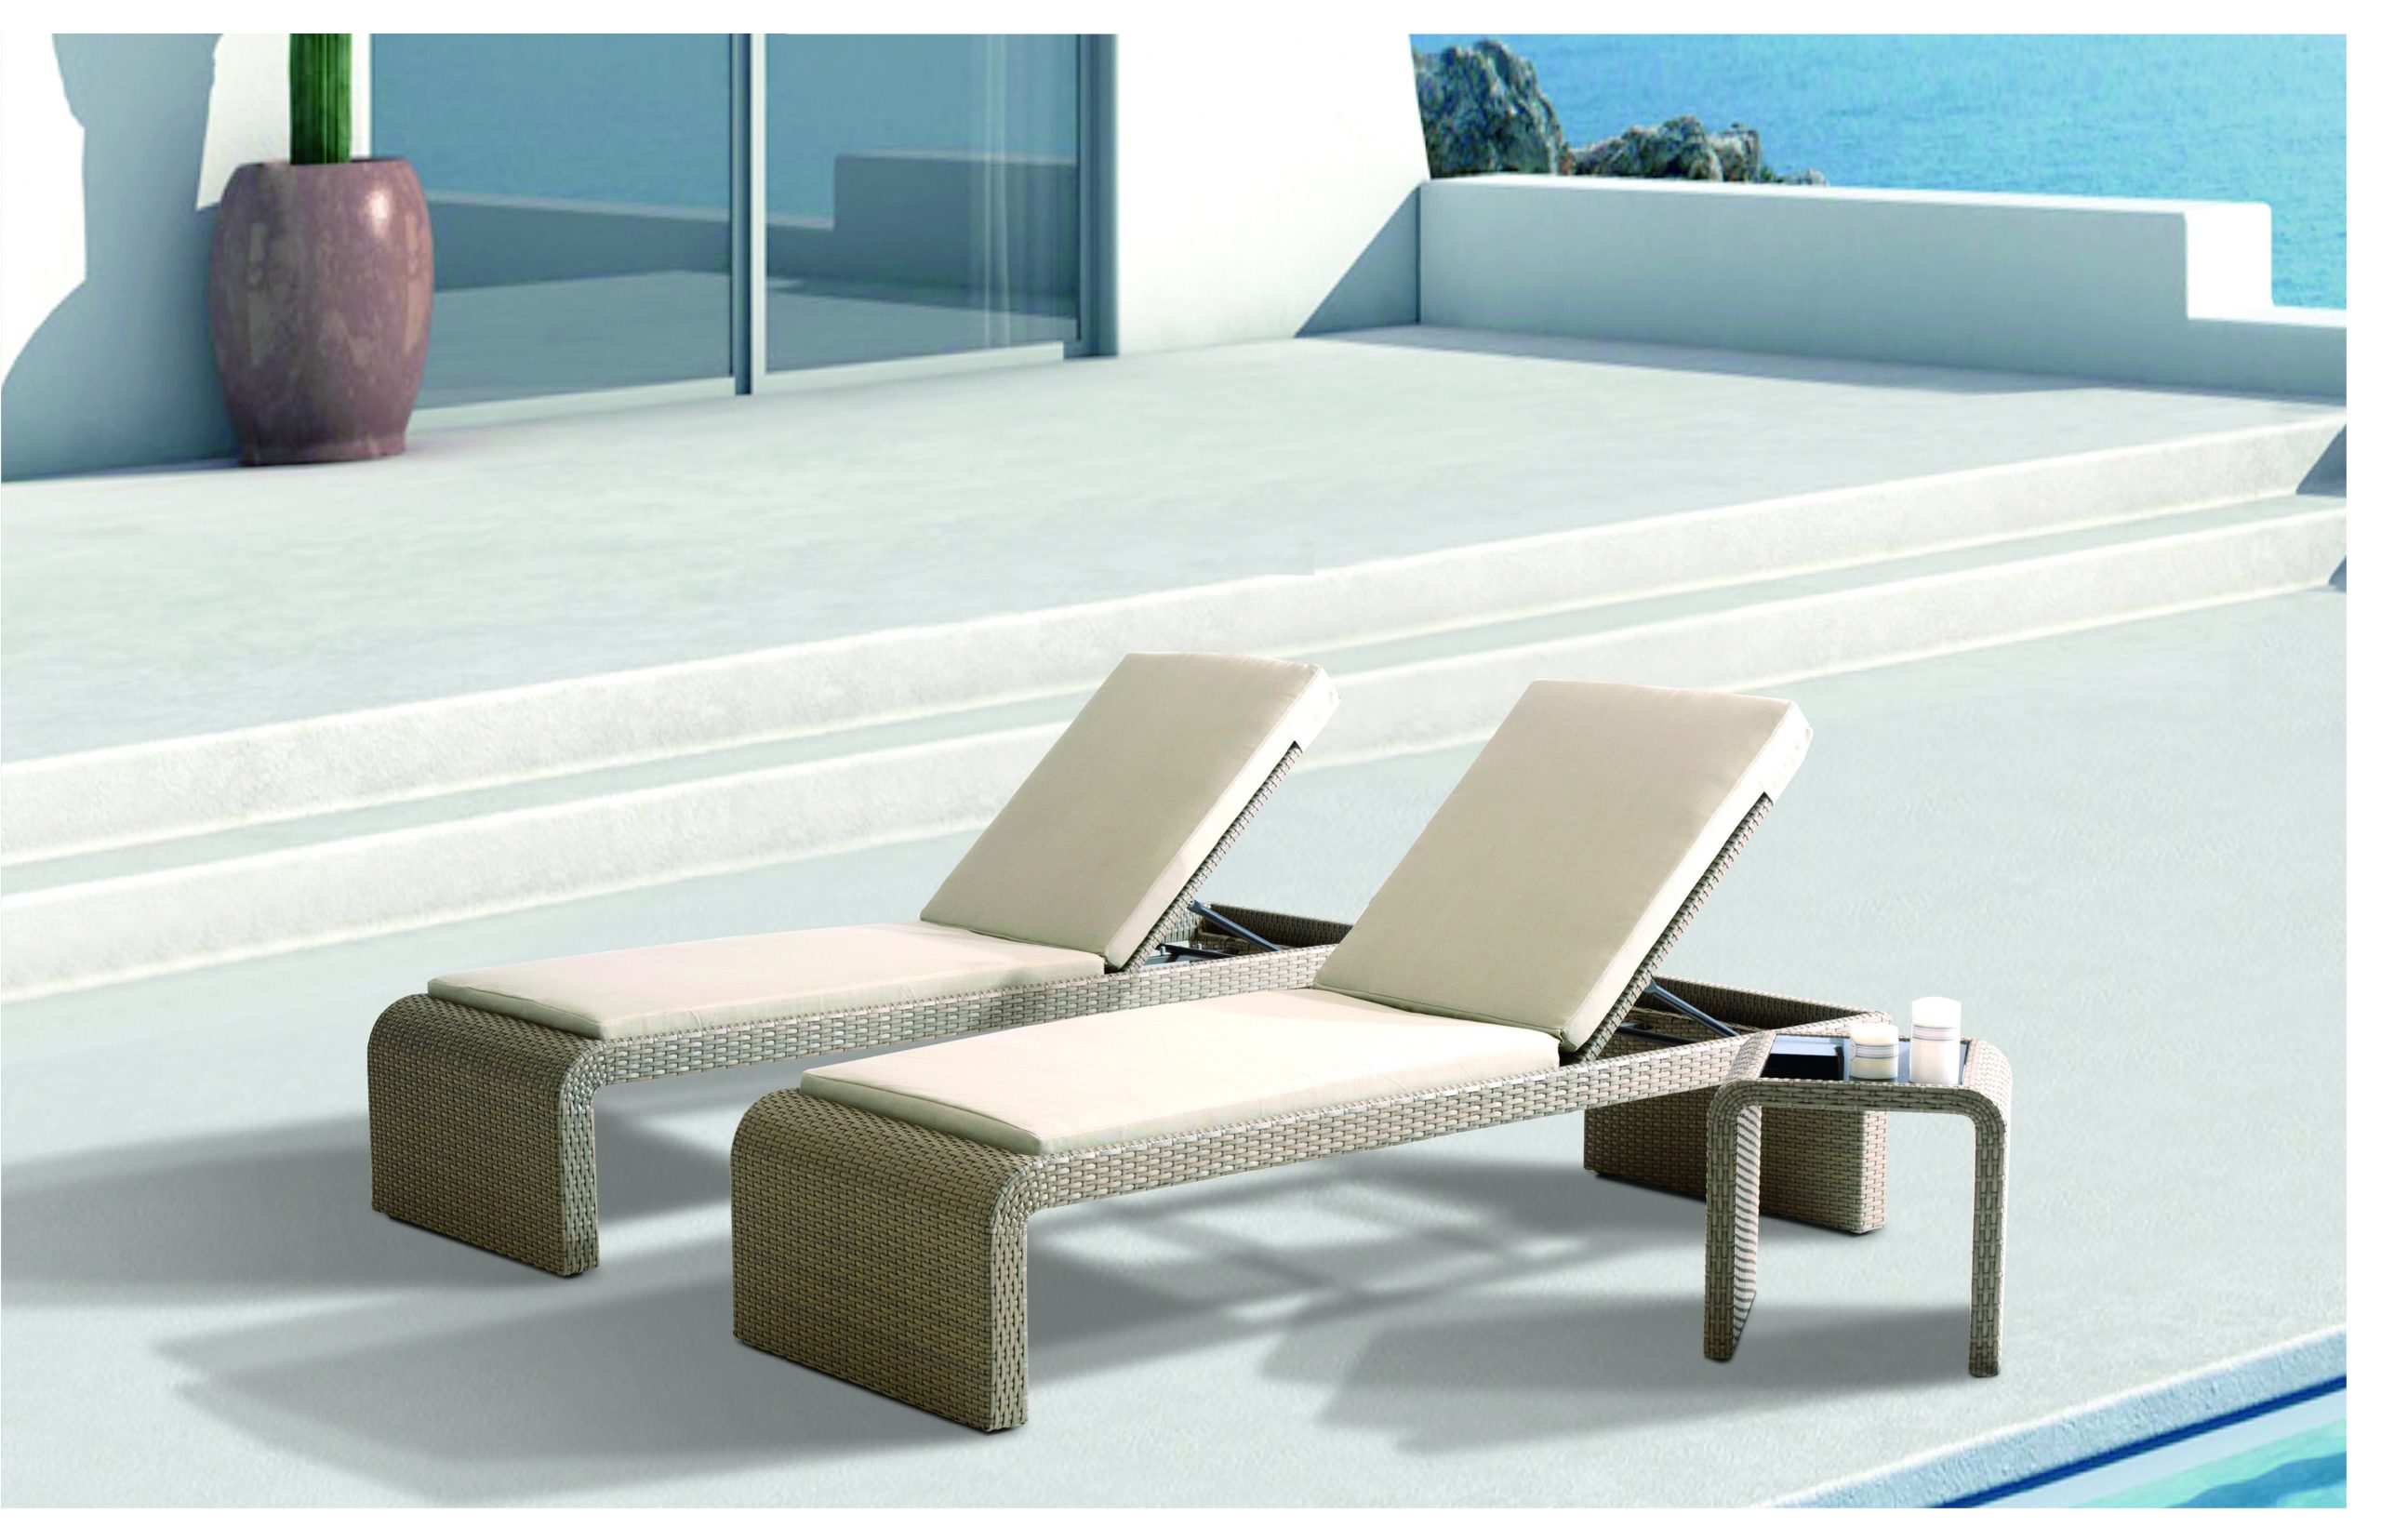 Cento-Chaise-Lounger-scaled-1-150x150.jpg